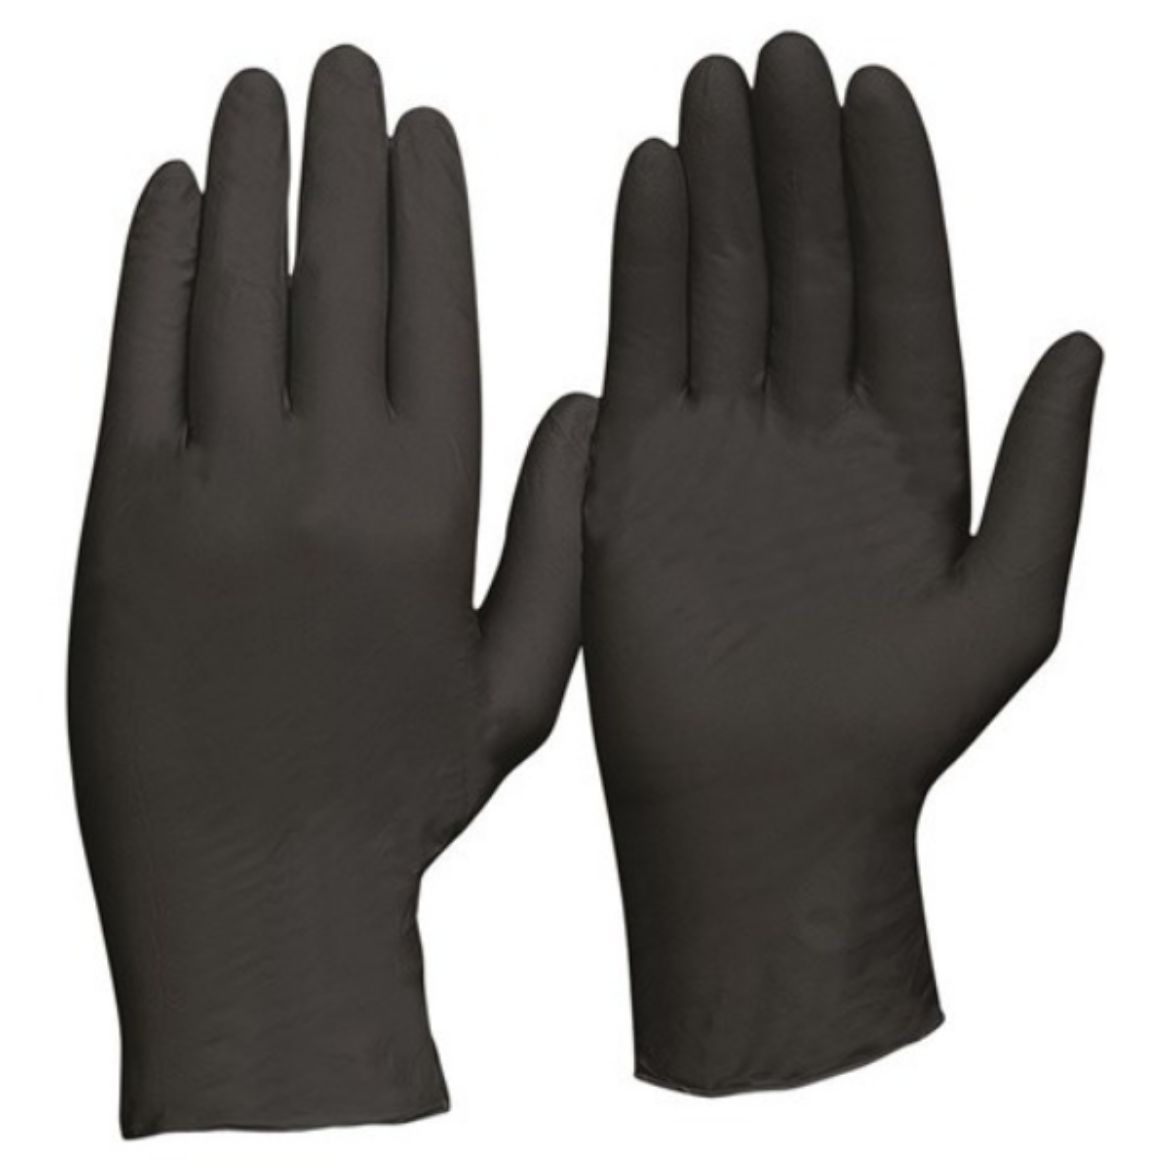 Picture of BLACK NITRILE POWDER FREE DISPOSABLE GLOVES. AVAILABLE IN SIZES S/M/L/XL/2XL